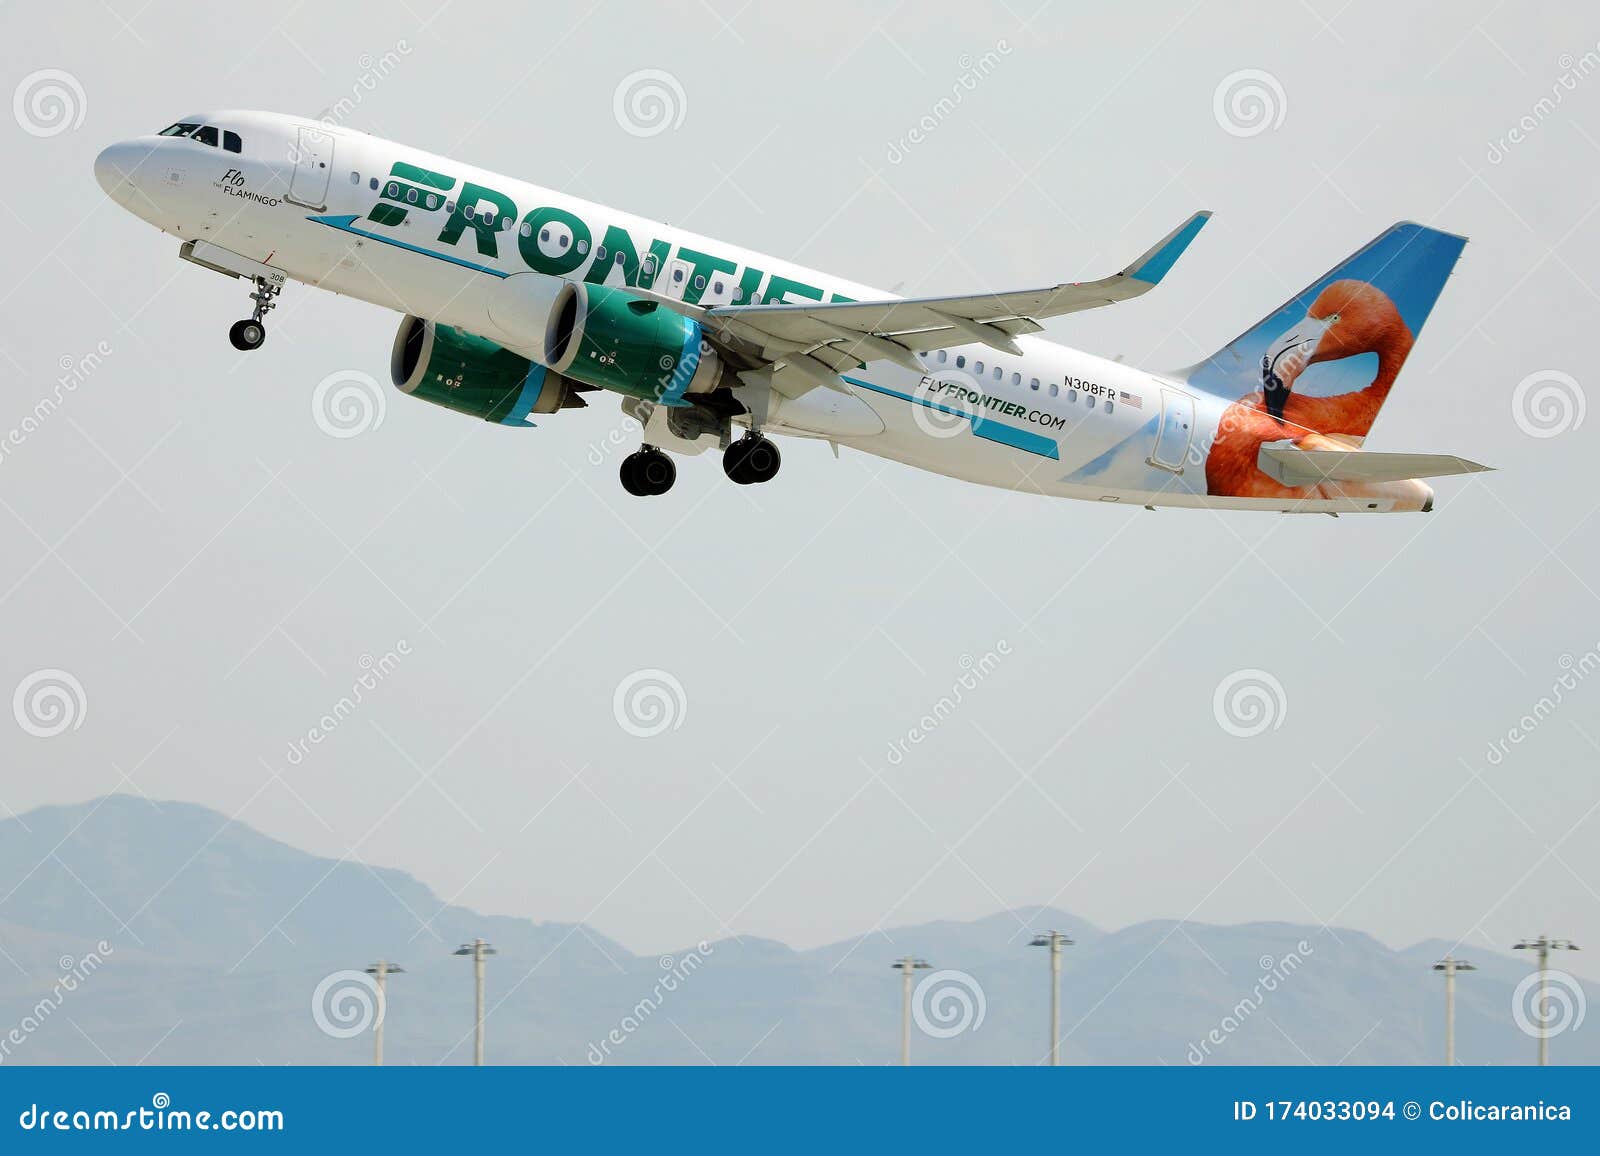 Flying Up in the Sky Editorial Stock Image of aircraft, planespotting: 174033094